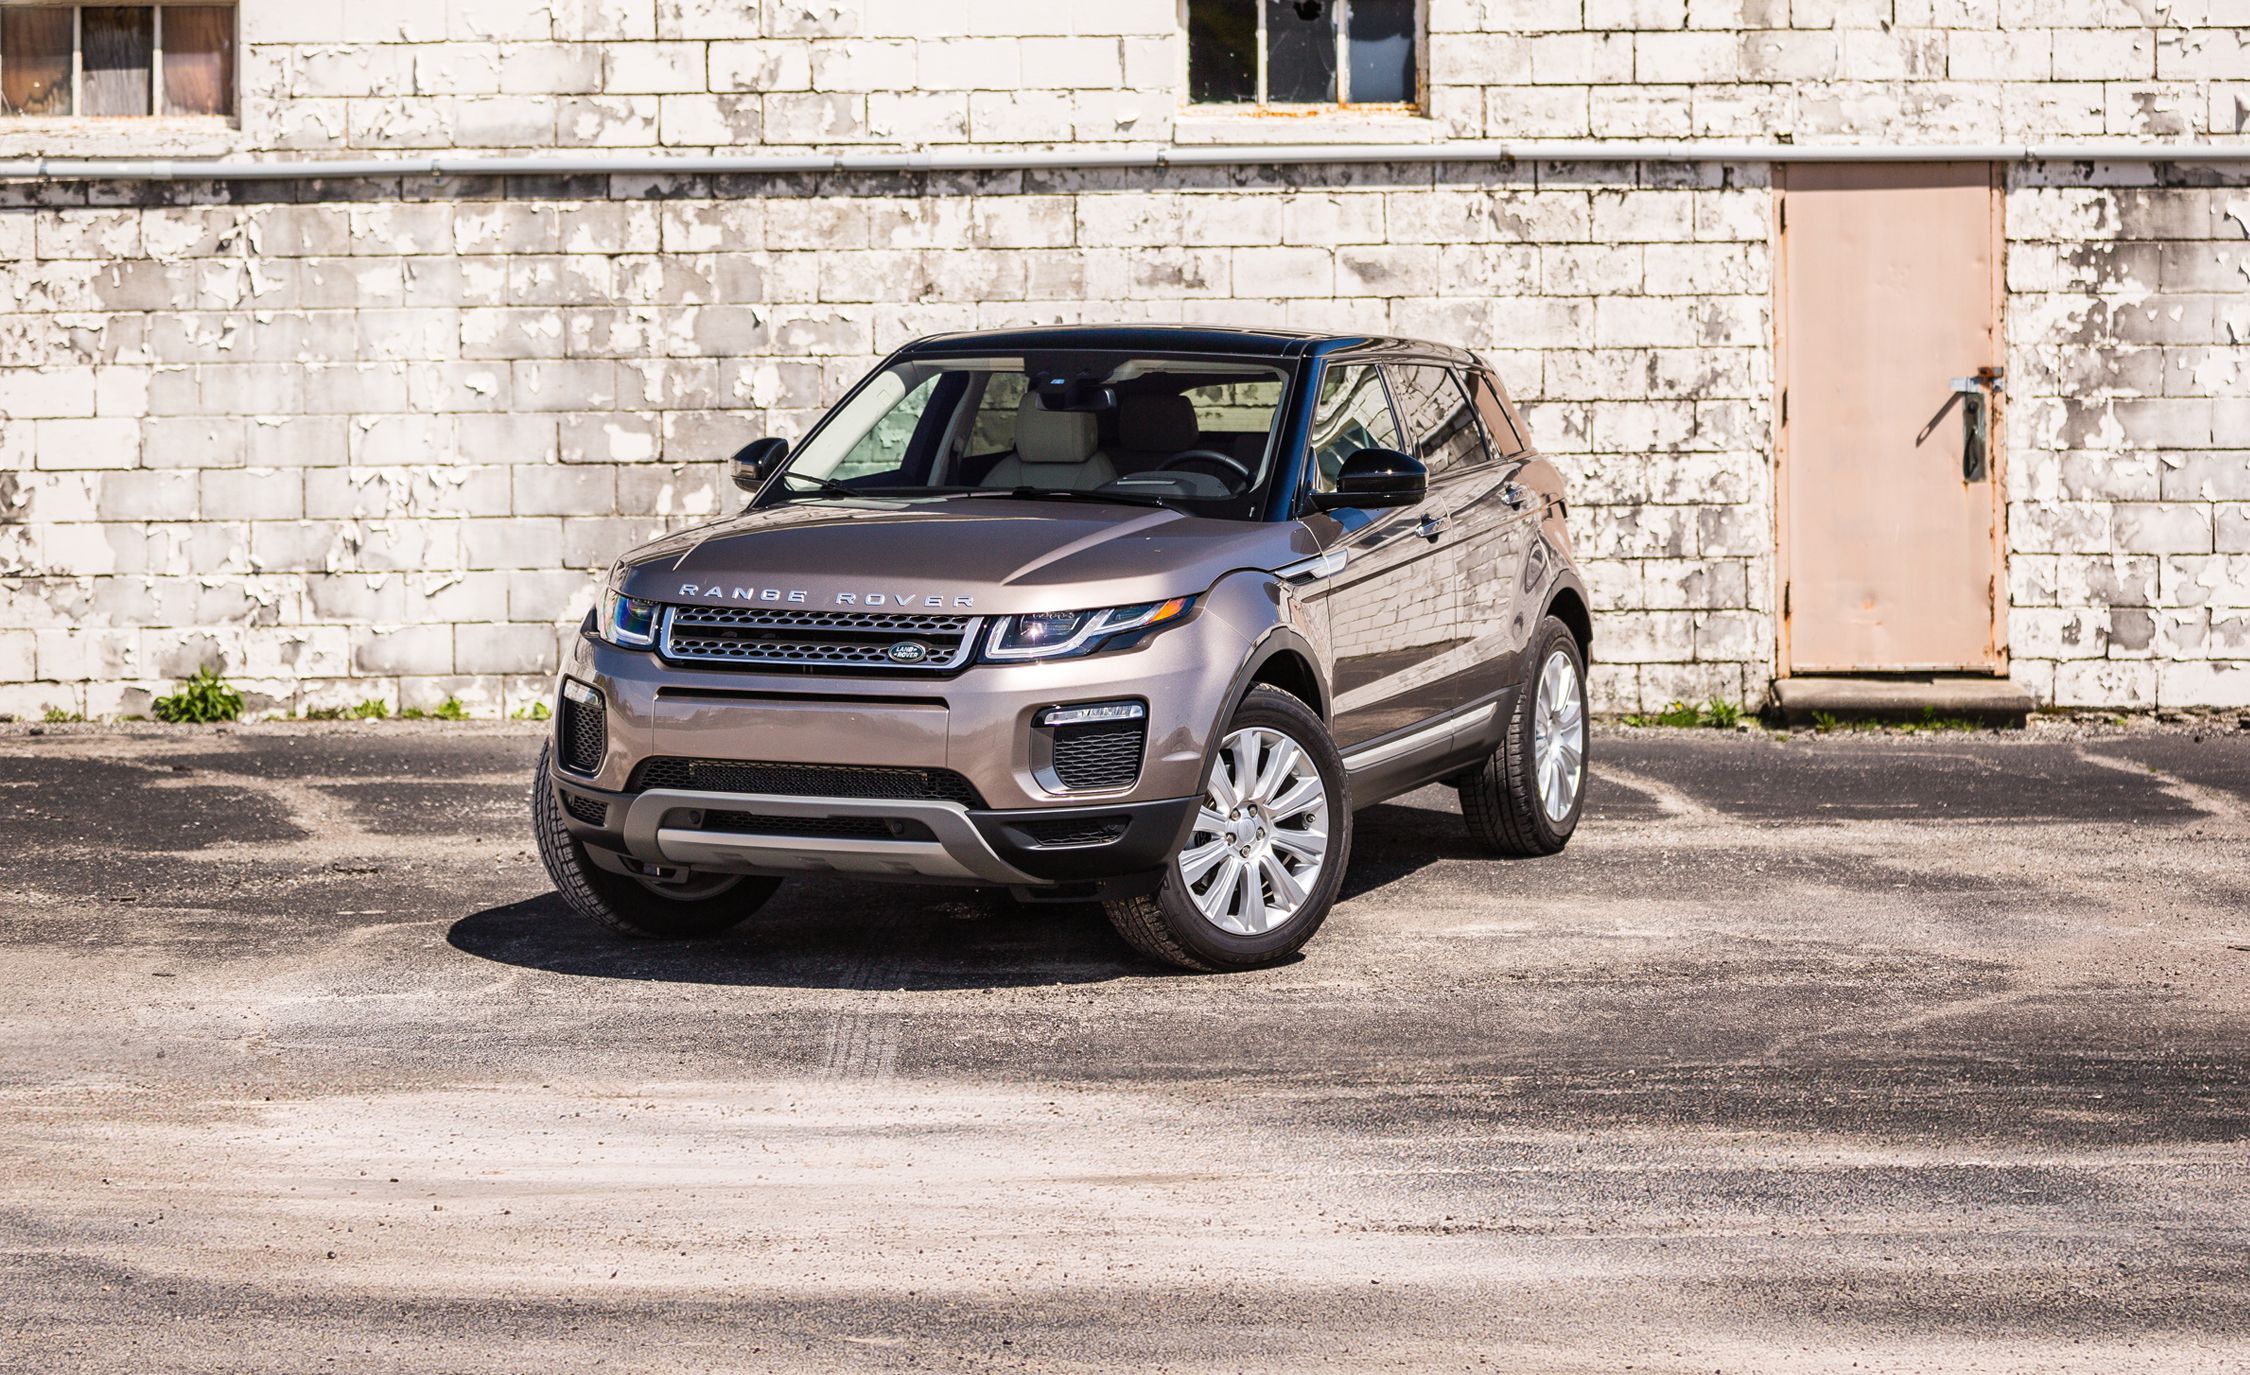 lowest price on a Land Rover Range Rover Evoque